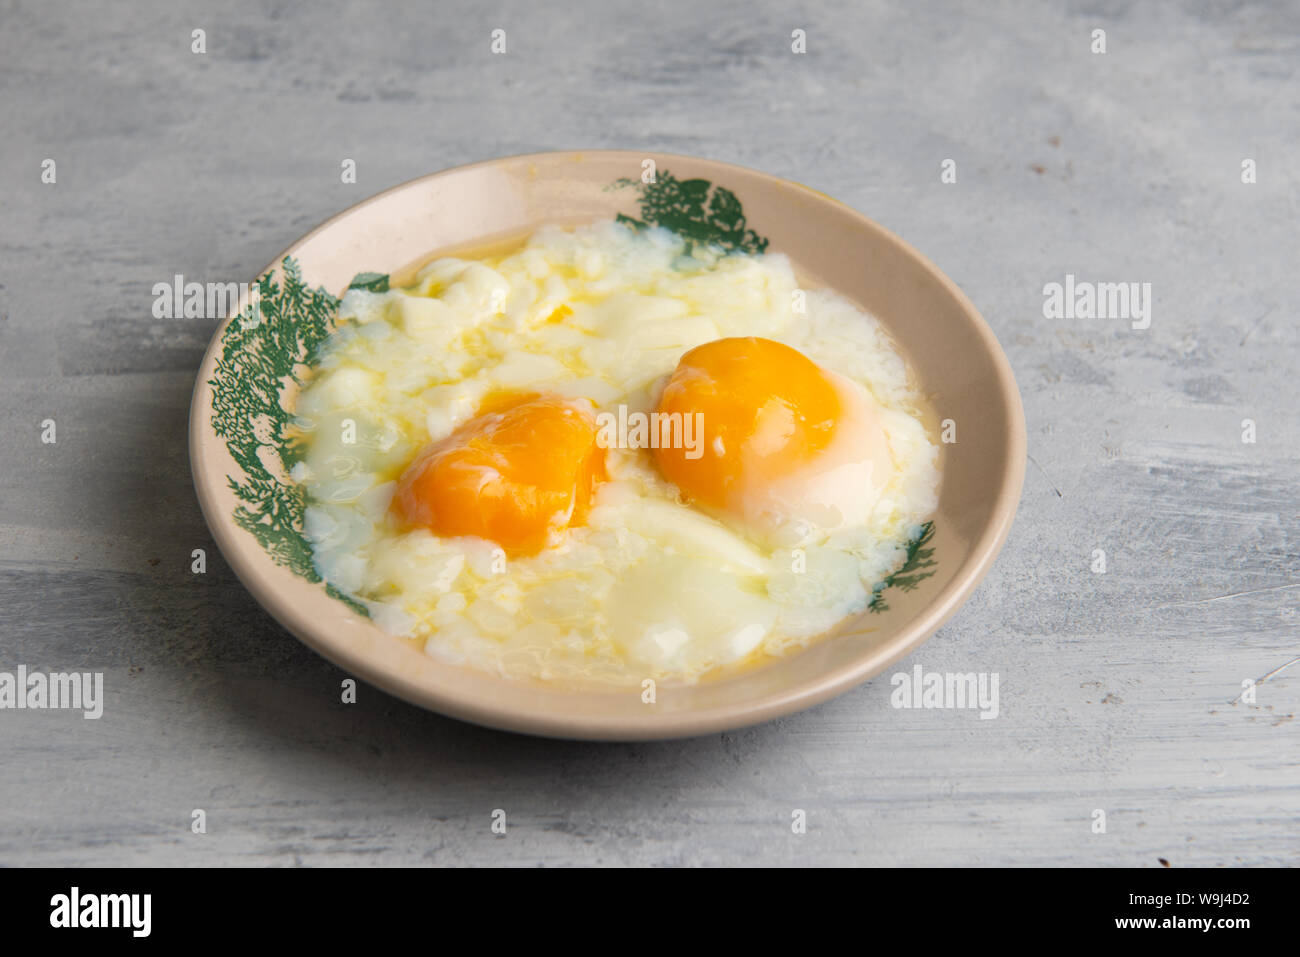 Hainam Style Half Boiled Egg Stock Photo, Picture and Royalty Free Image.  Image 128339306.